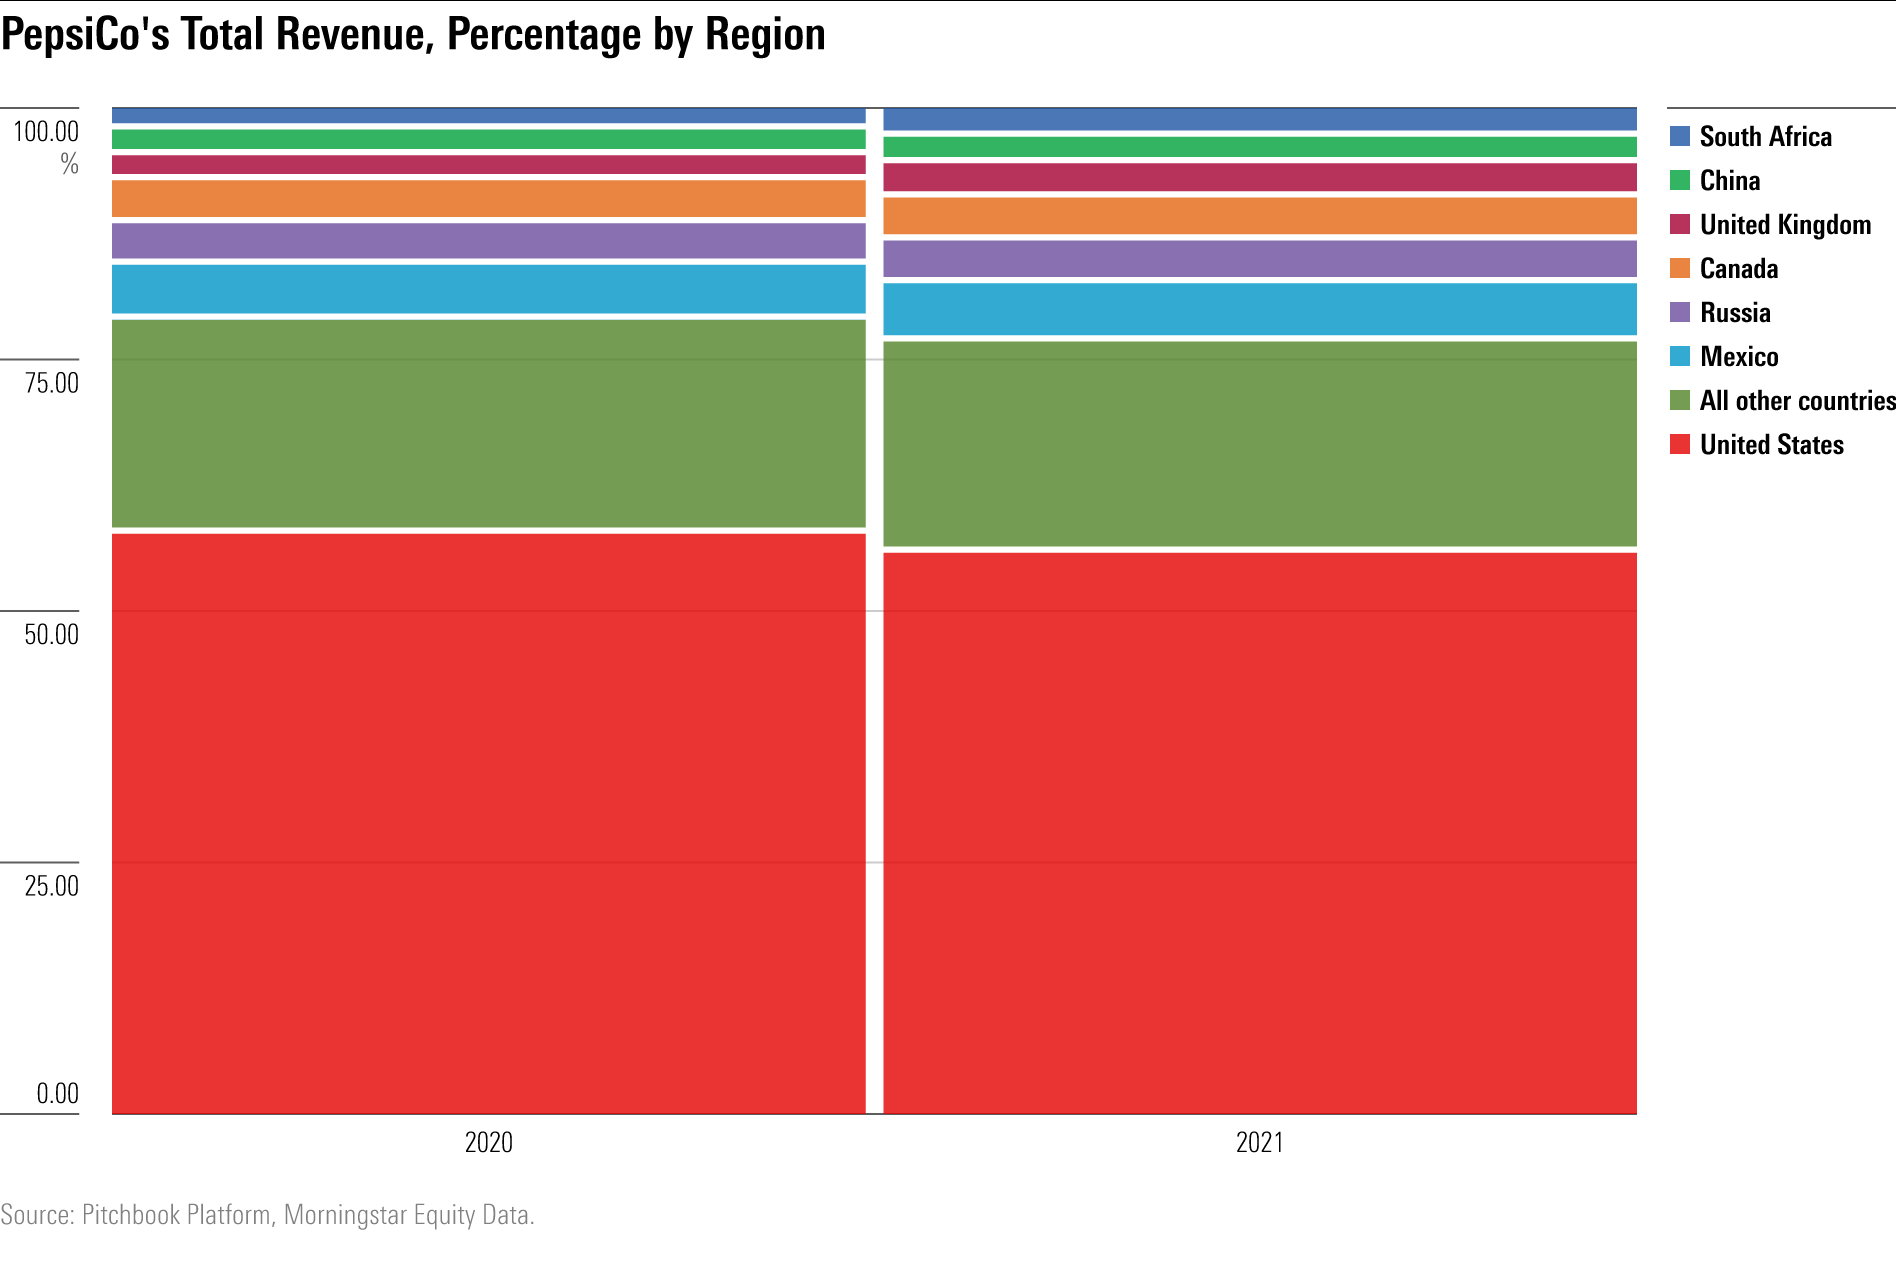 A bar chart depicting the percentage of Pepsi's revenue by region in fiscal years 2020 and 2021.